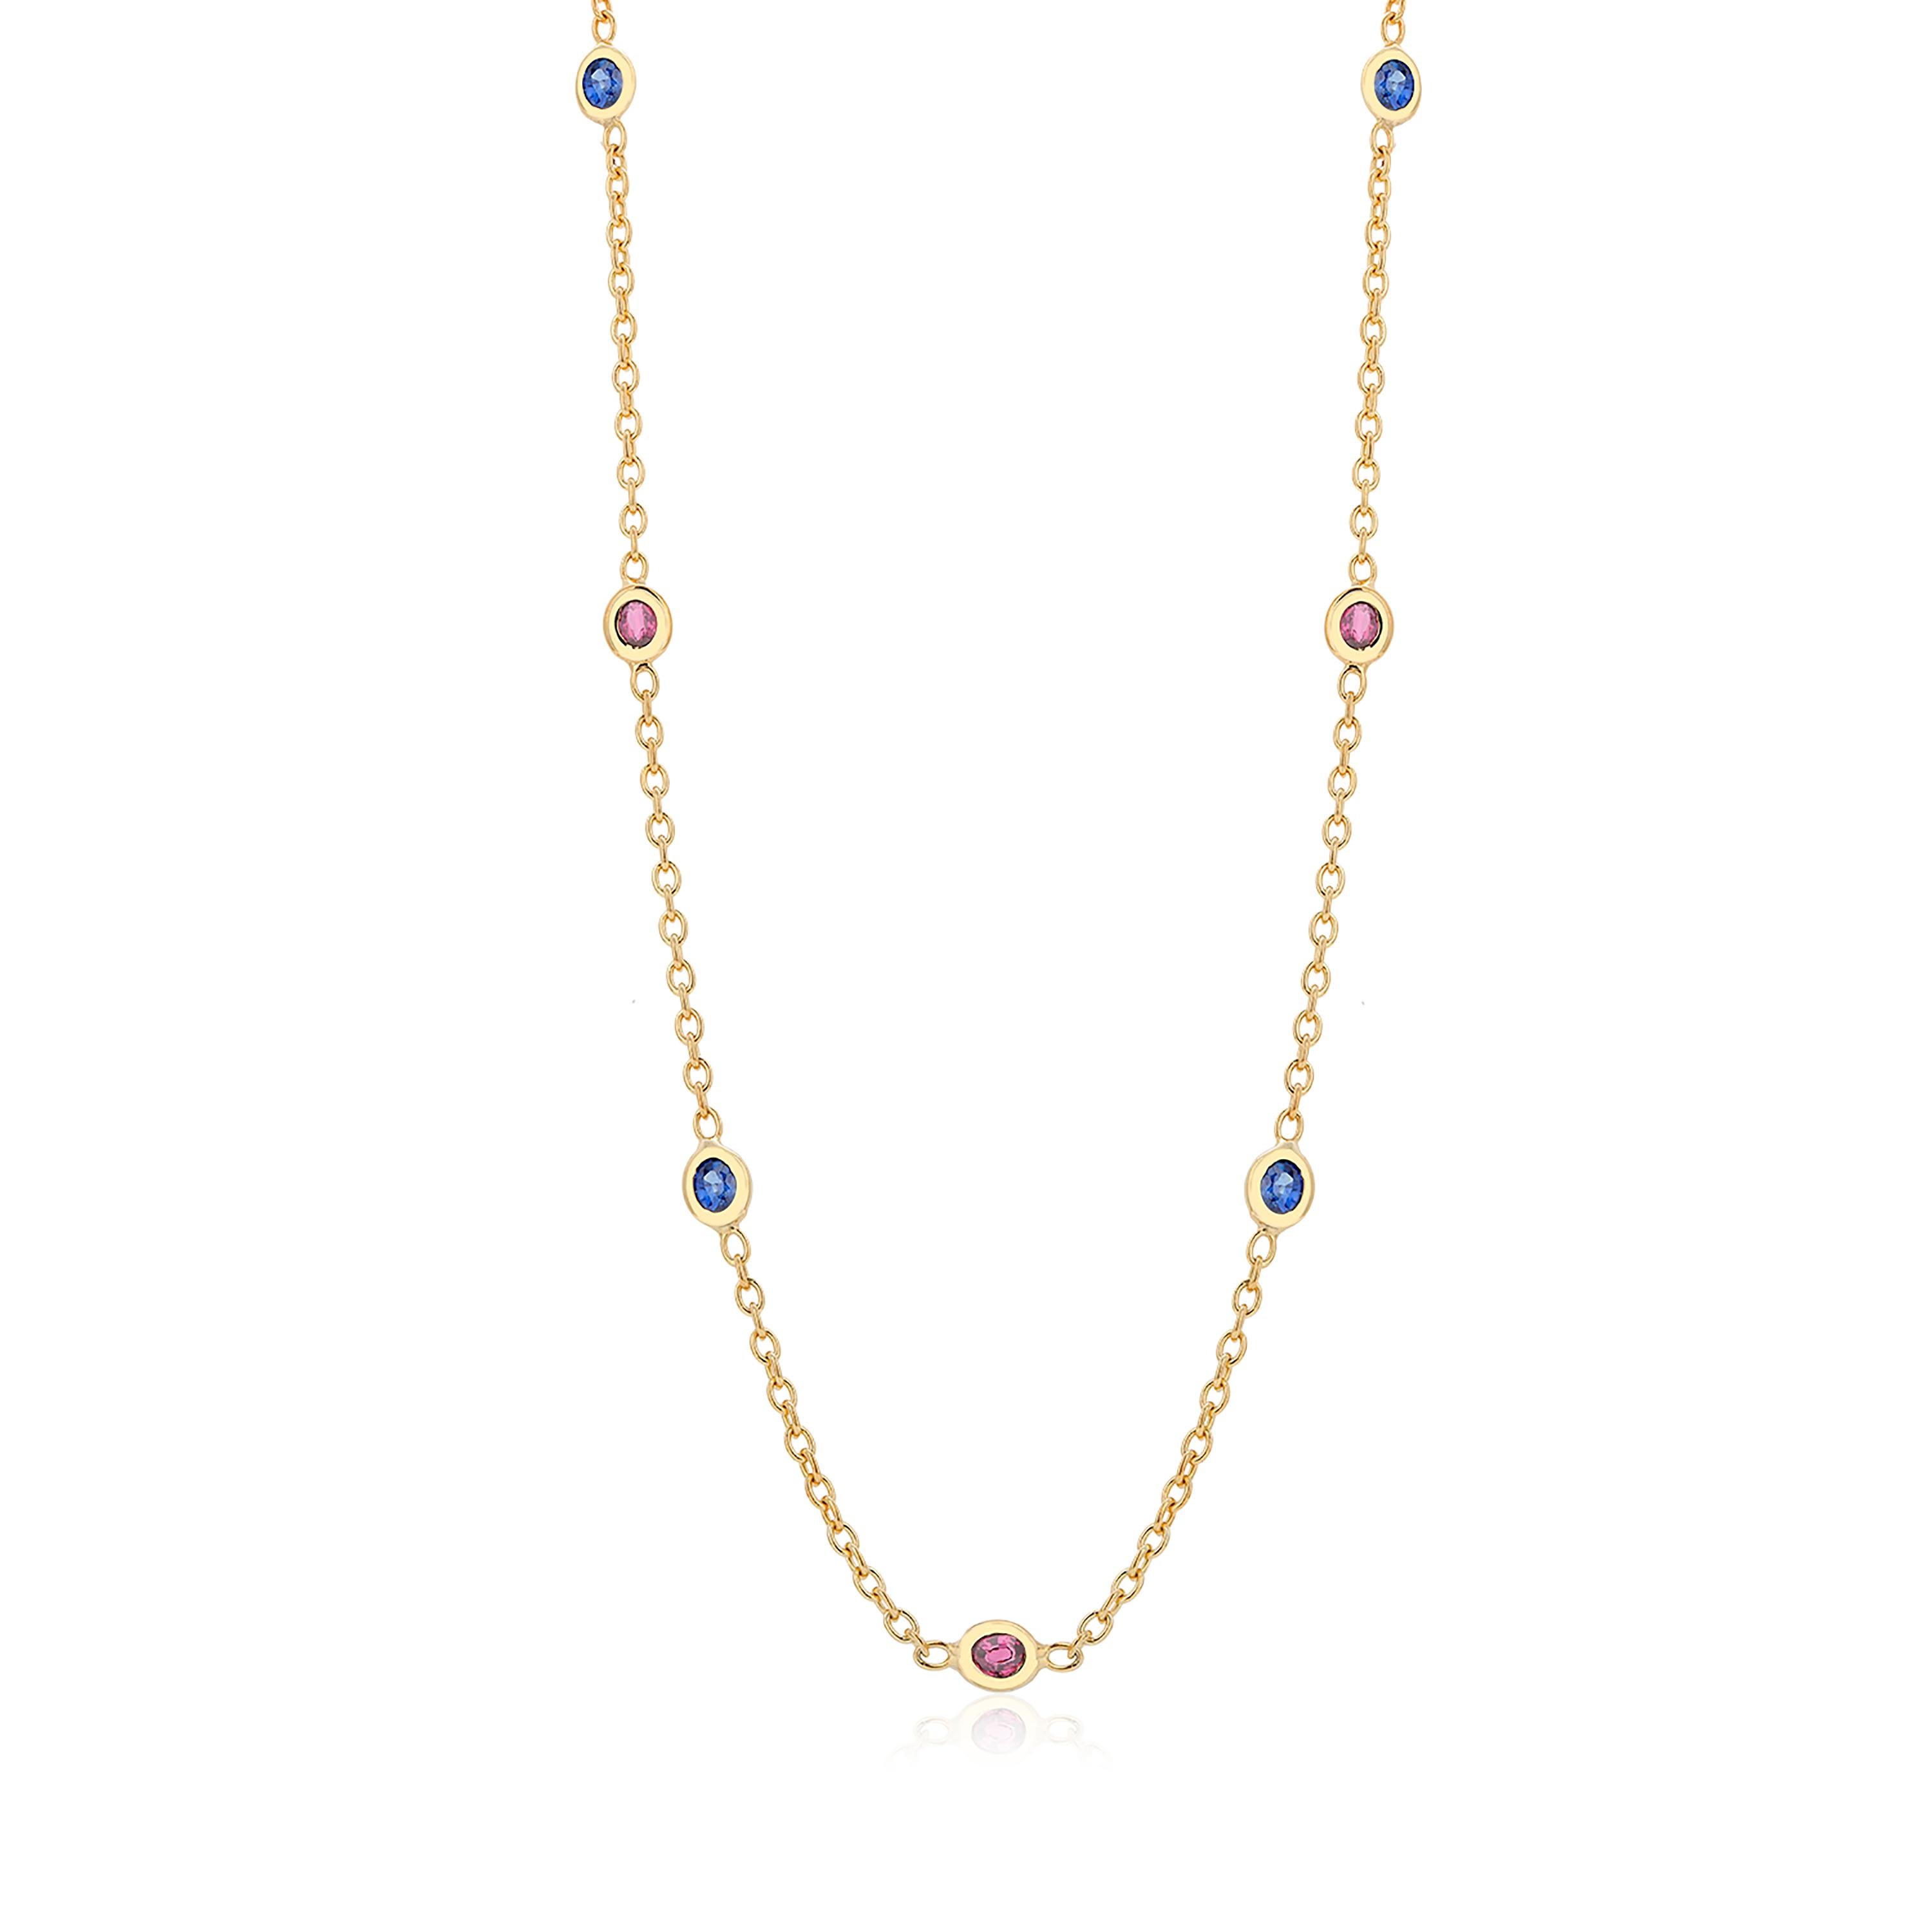 Modern Seven Natural Oval Sapphires and Rubies Bezel Necklace Silver Yellow Gold-Plated